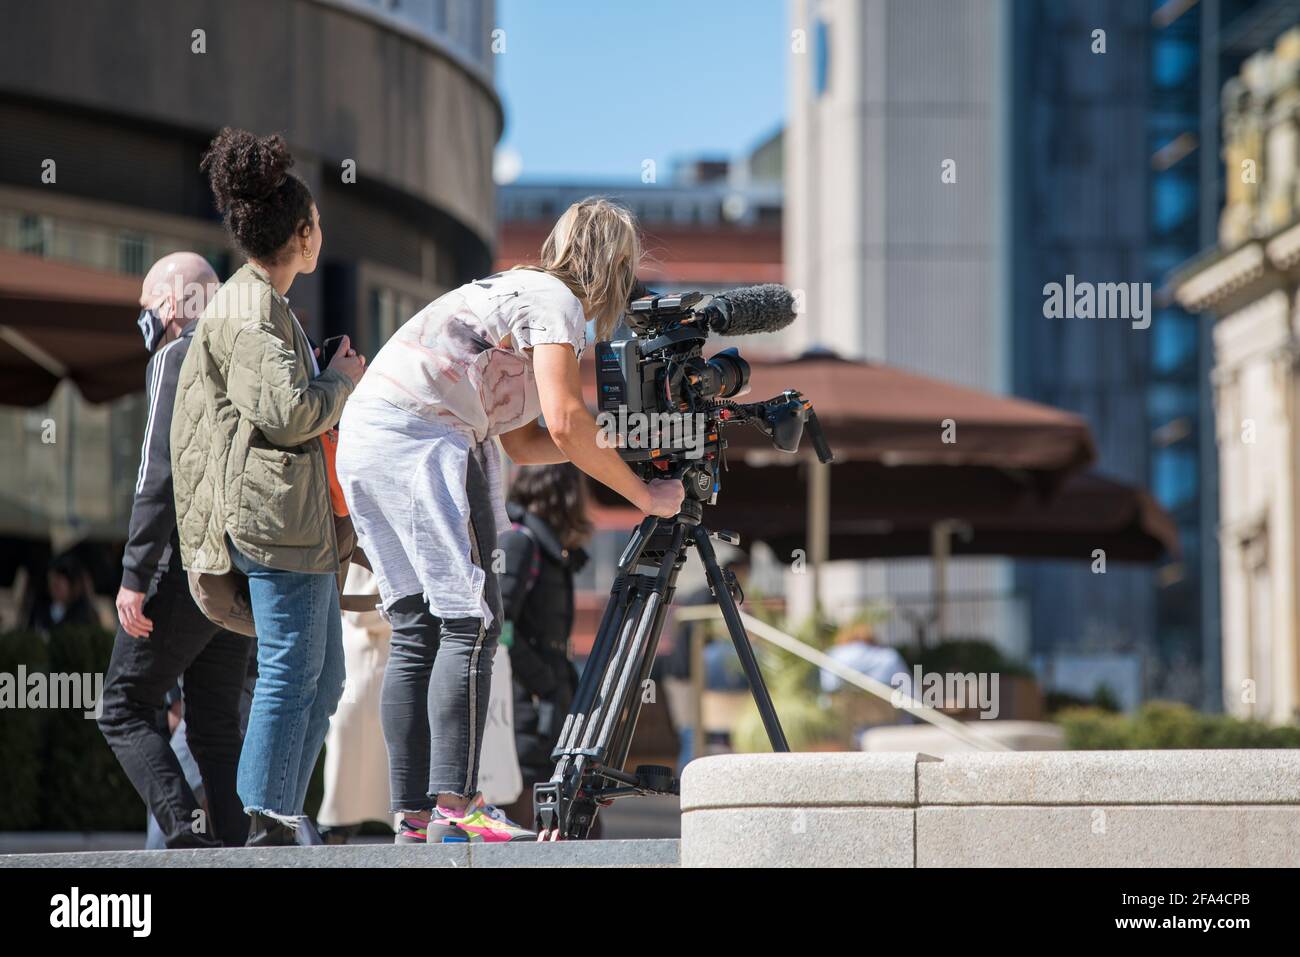 A woman operating a TV camera outdoors in Birmingham, UK. Stock Photo